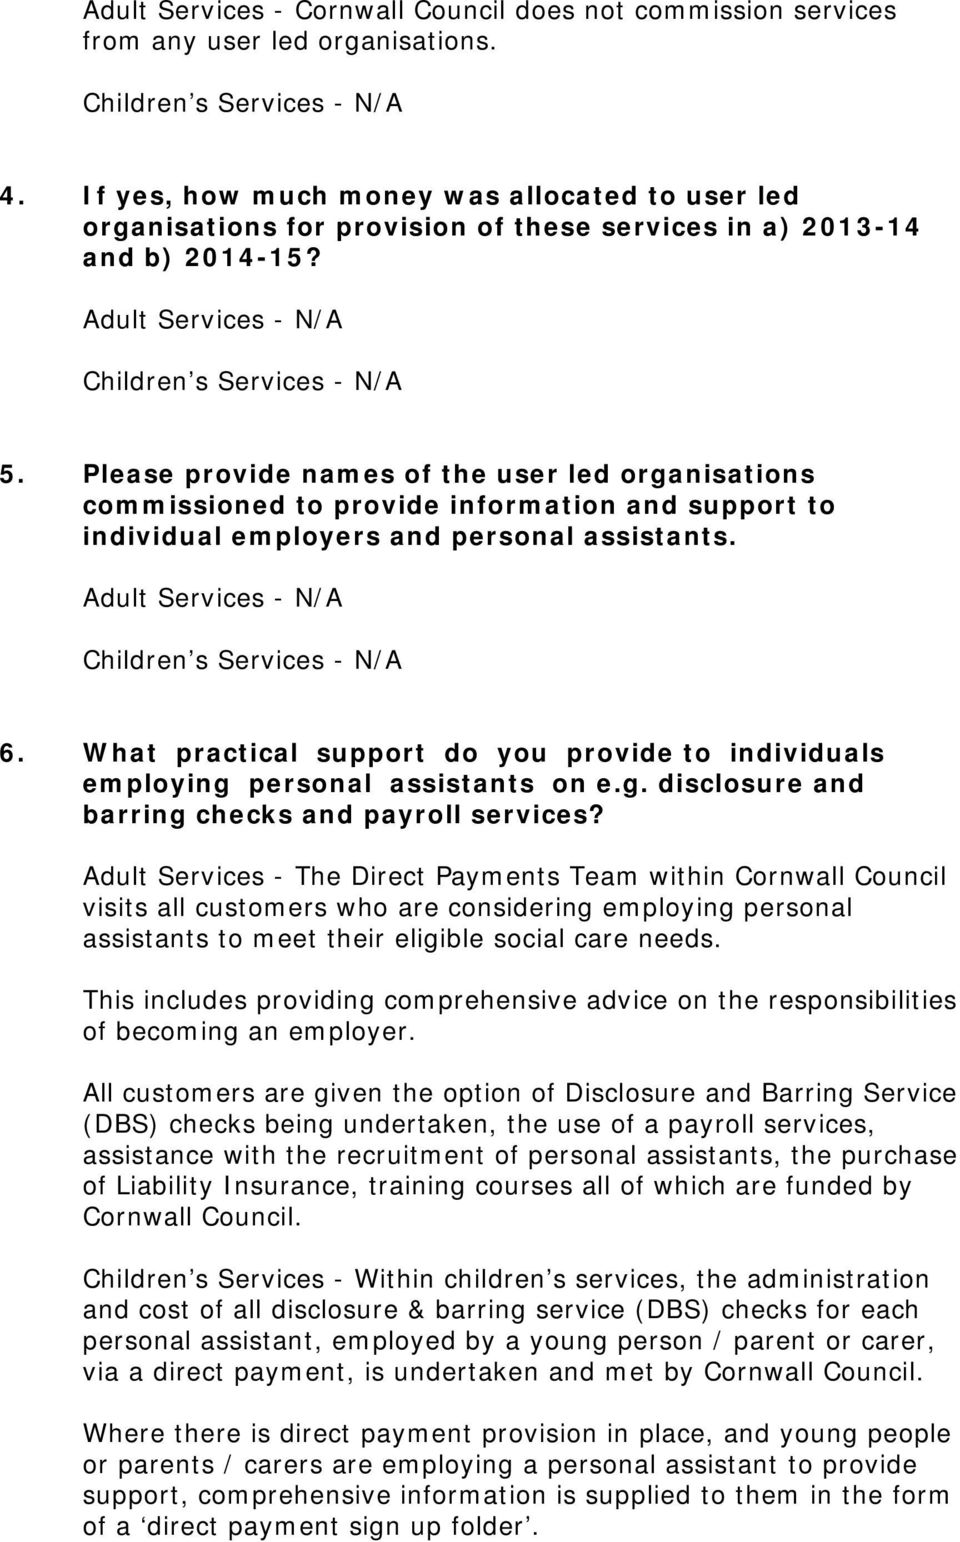 Please provide names of the user led organisations commissioned to provide information and support to individual employers and personal assistants. Adult Services - N/A 6.